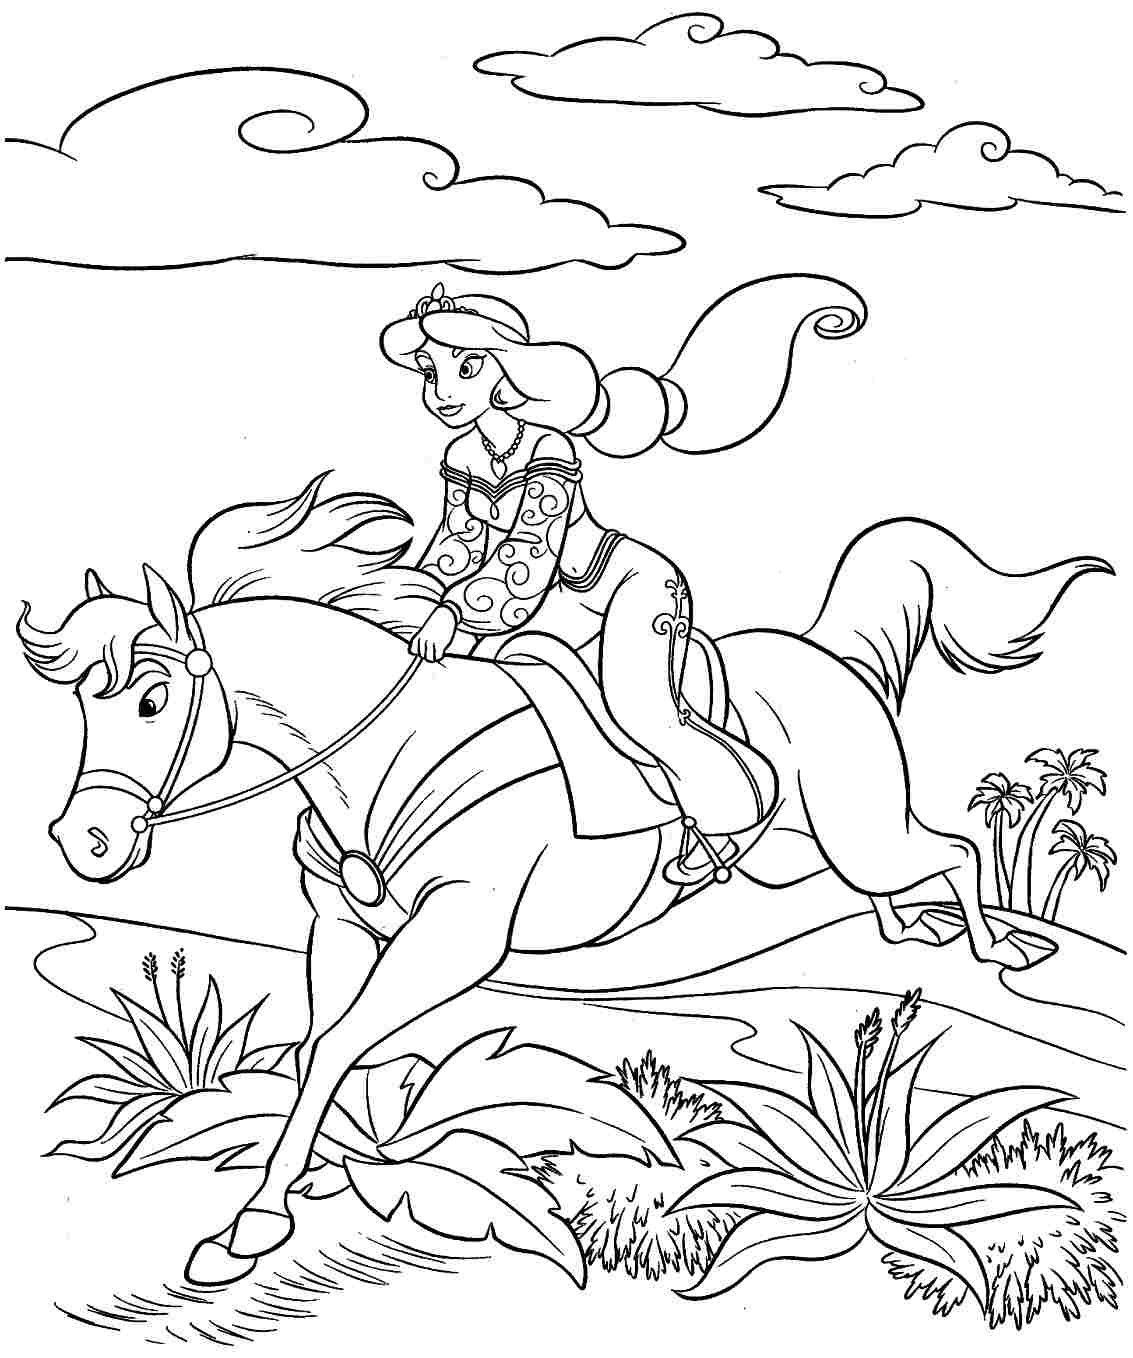 Princess with Horse Coloring Page Wallpaper